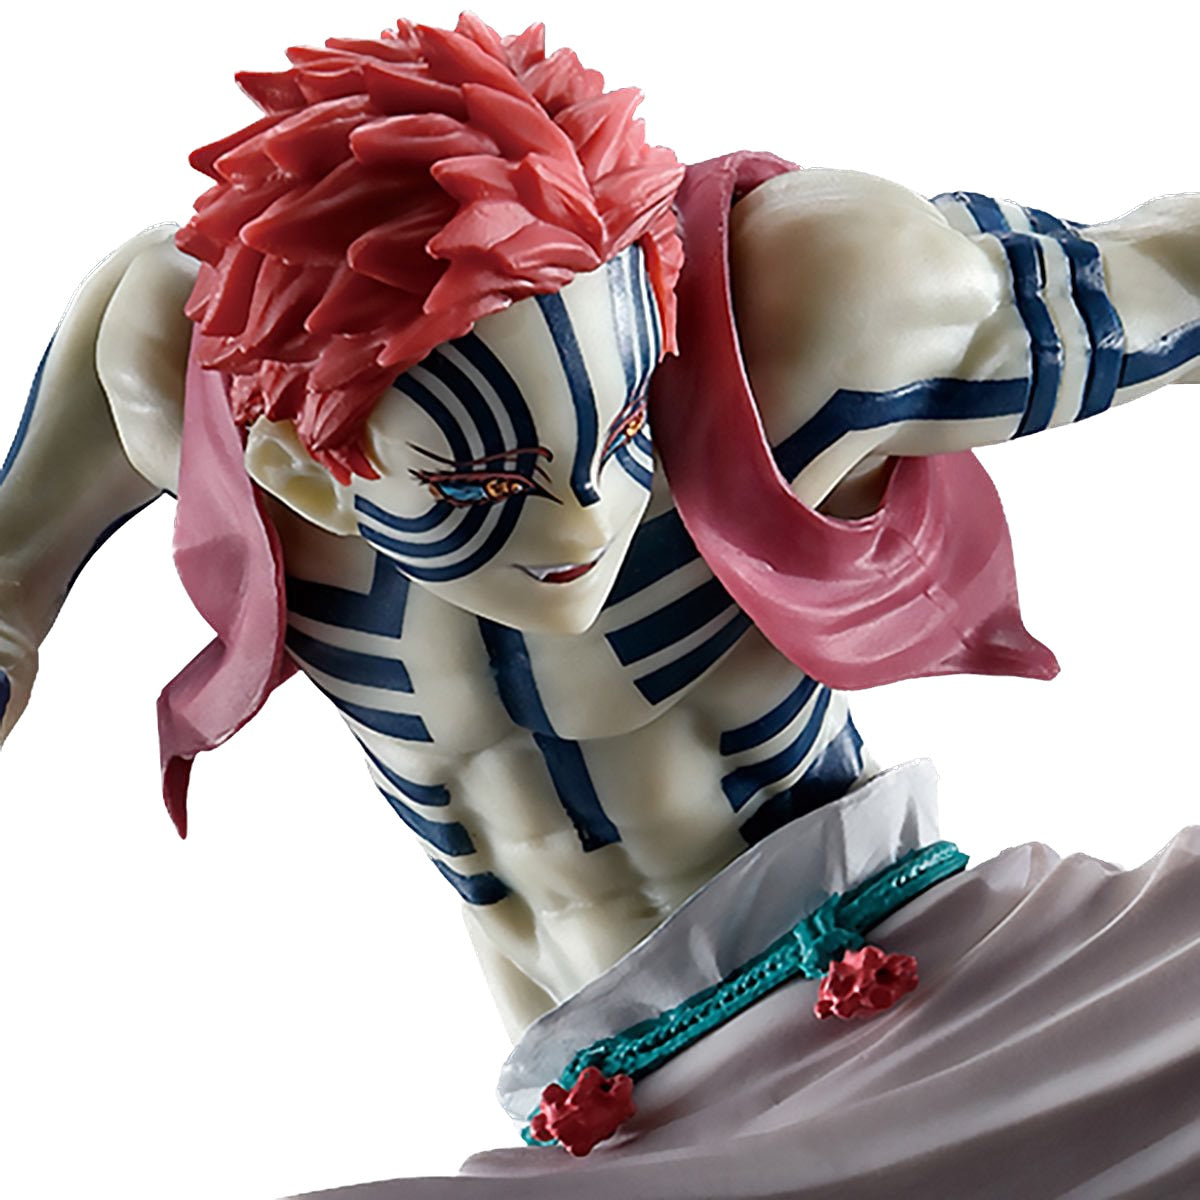 
                  
                    A highly detailed figure of Akaza from Demon Slayer: Kimetsu no Yaiba, crafted by Bandai Spirits Ichibansho. The figure stands at 3.7 inches tall and showcases Akaza in his notable pose.
                  
                